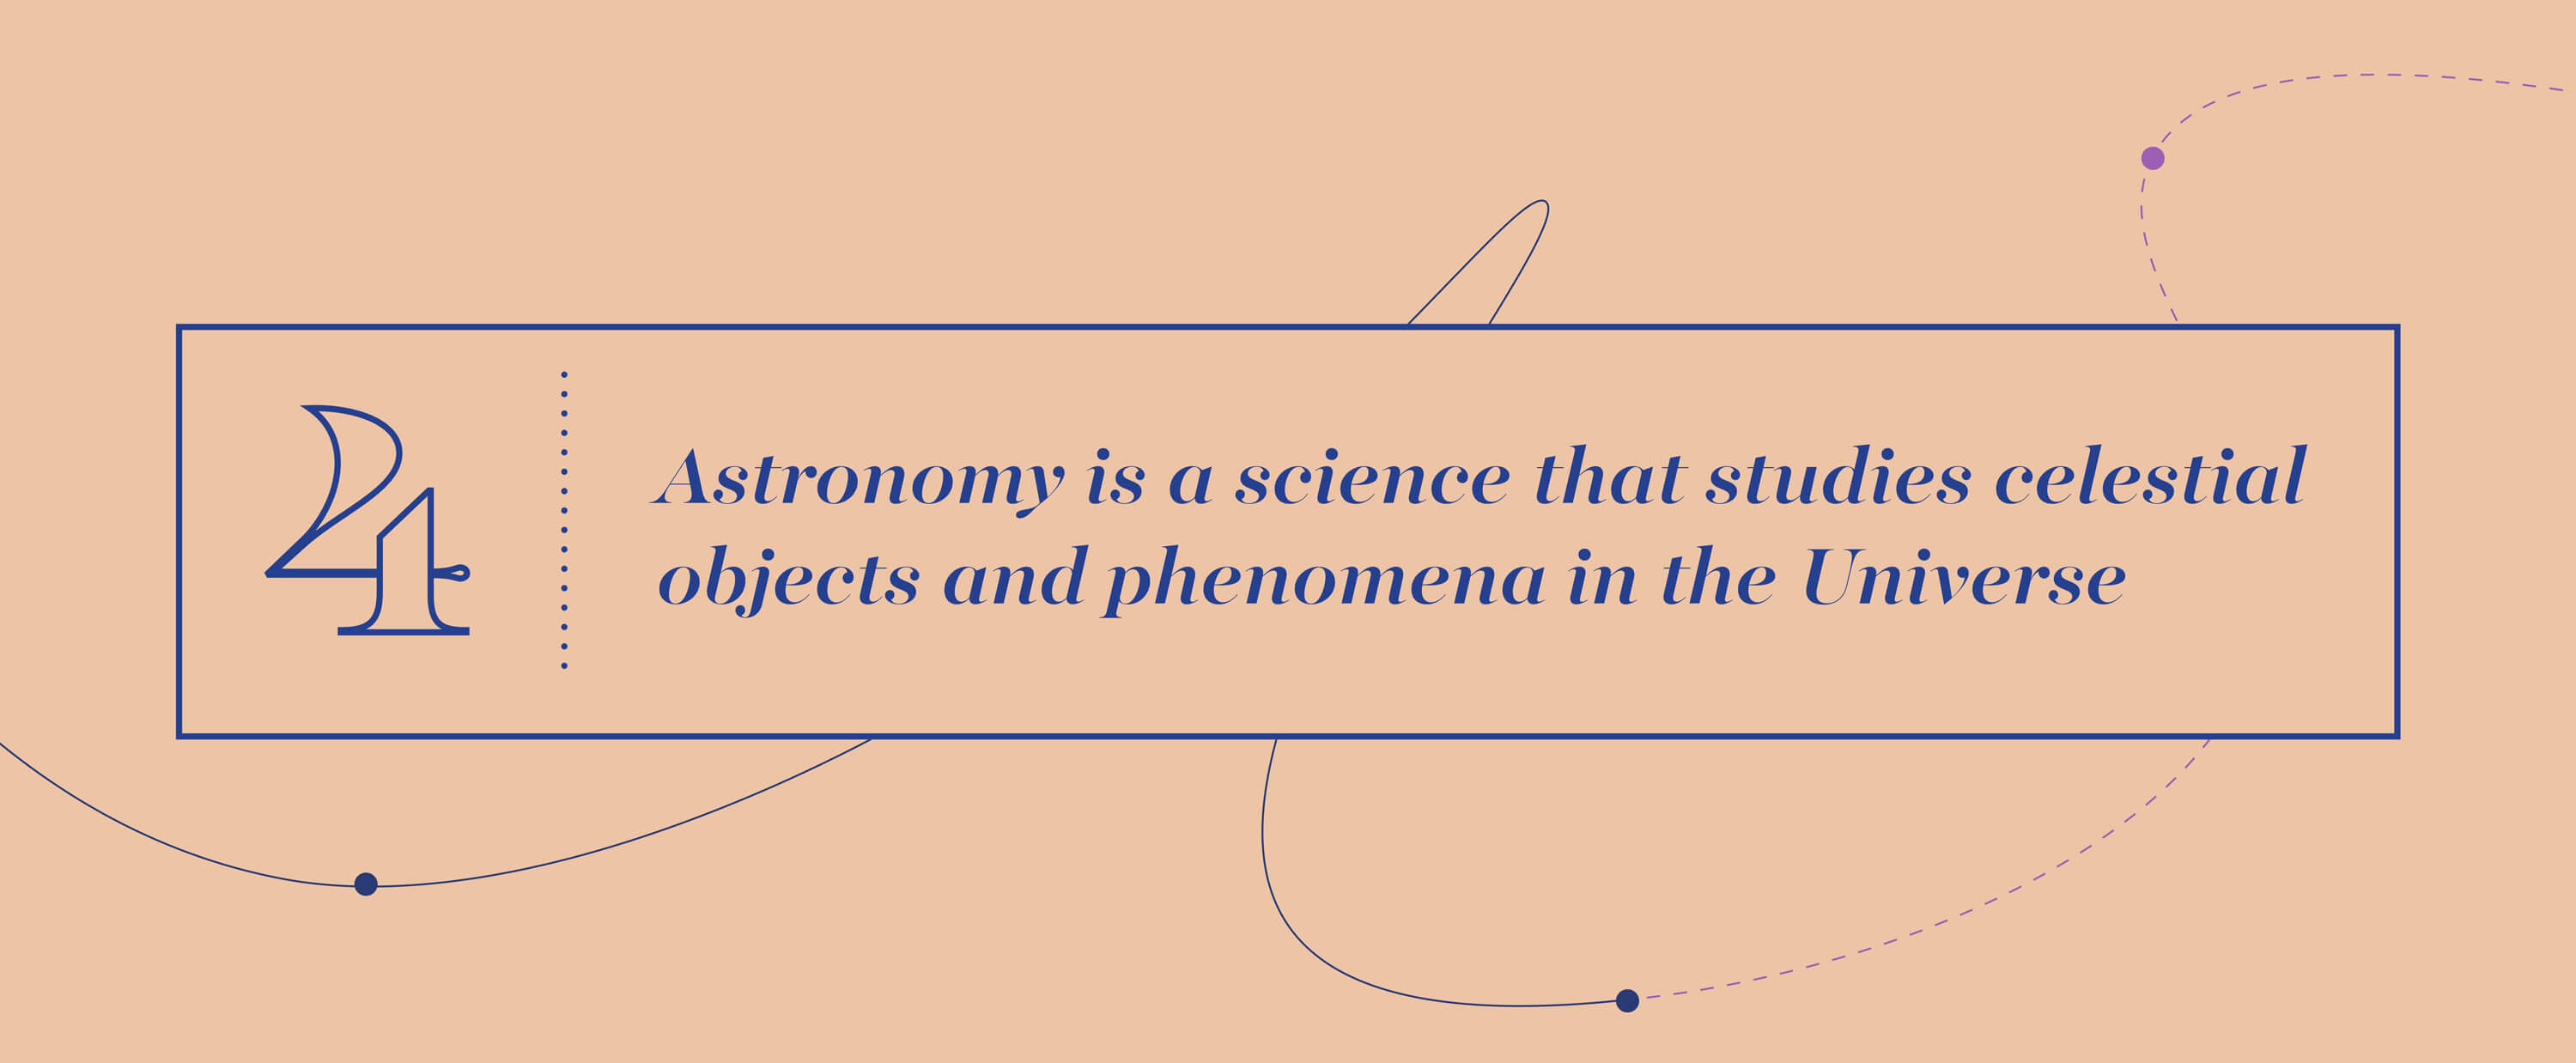 Big Idea 4 - Astronomy is a science that studies celestial objects and phenomena in the Universe